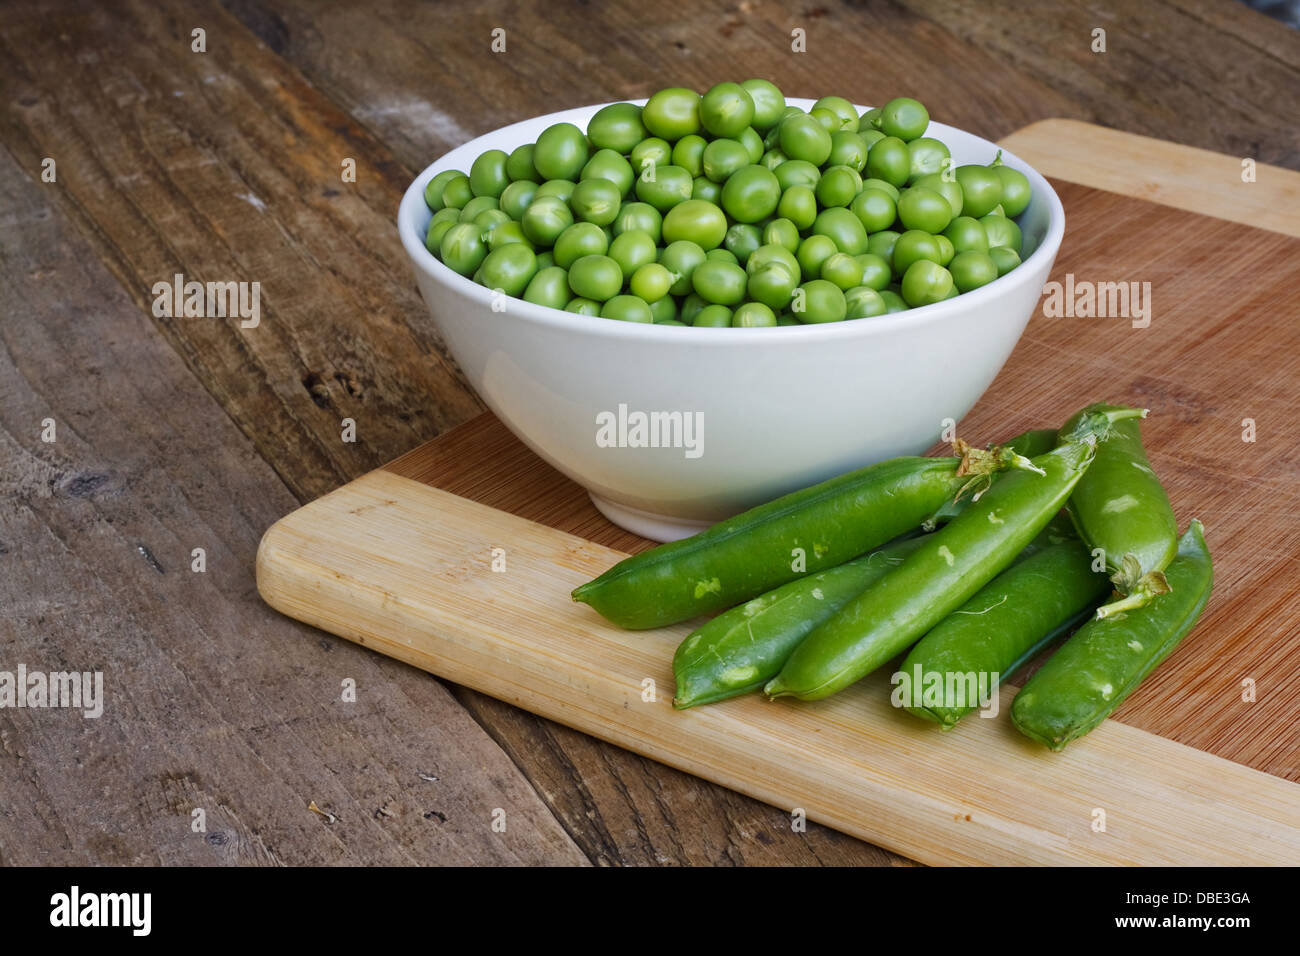 garden peas in a bowl in rustic setting with pea pods Stock Photo